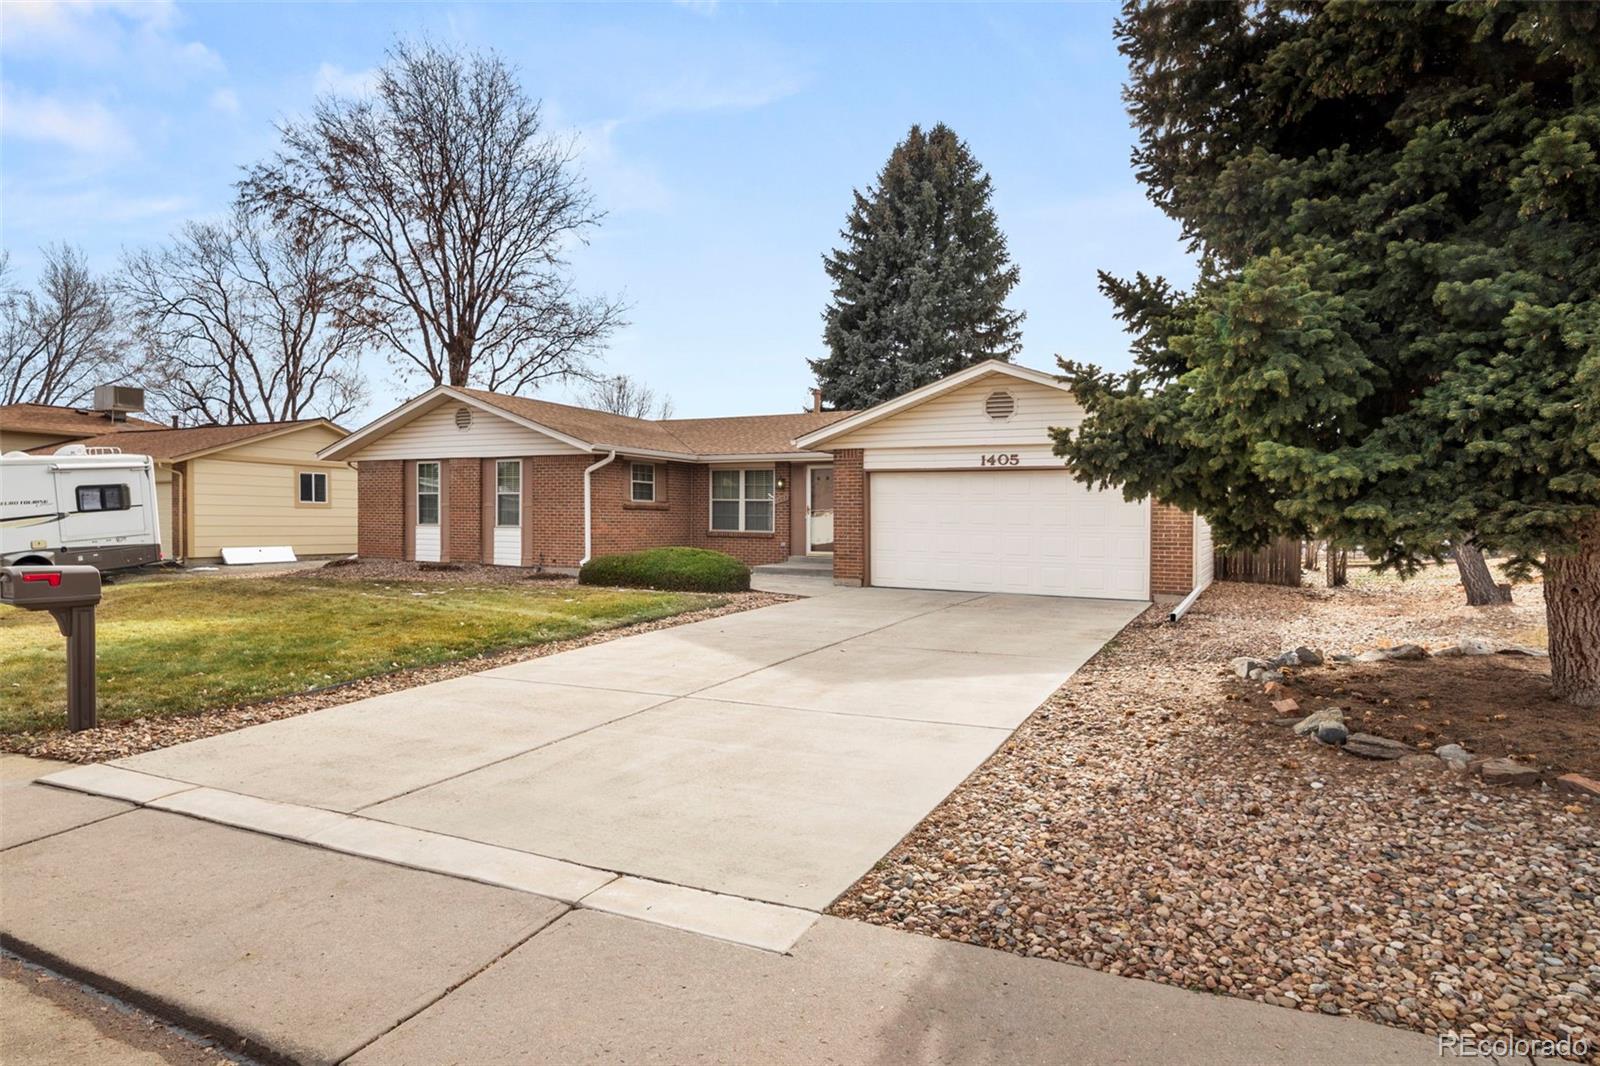 1405  monterey drive, Broomfield sold home. Closed on 2024-02-27 for $610,000.